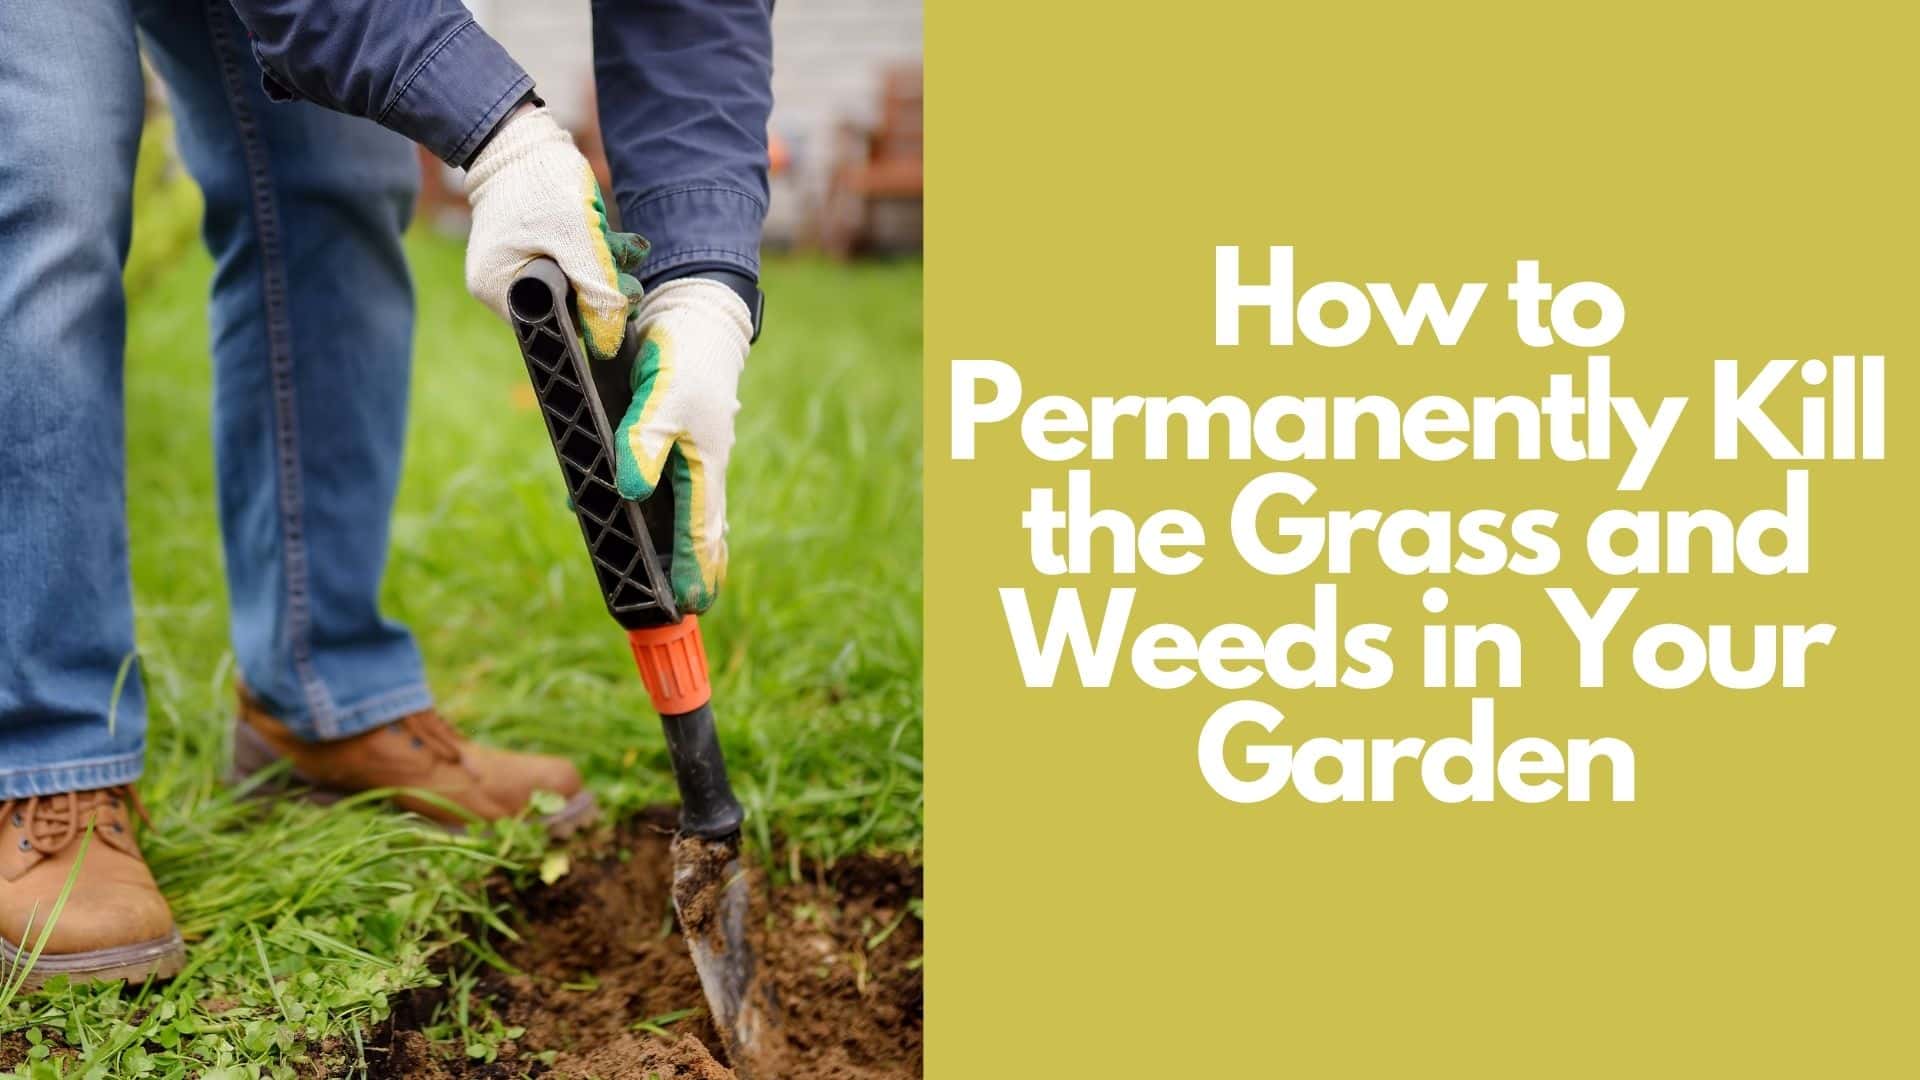 How to Permanently Kill the Grass and Weeds in Your Garden